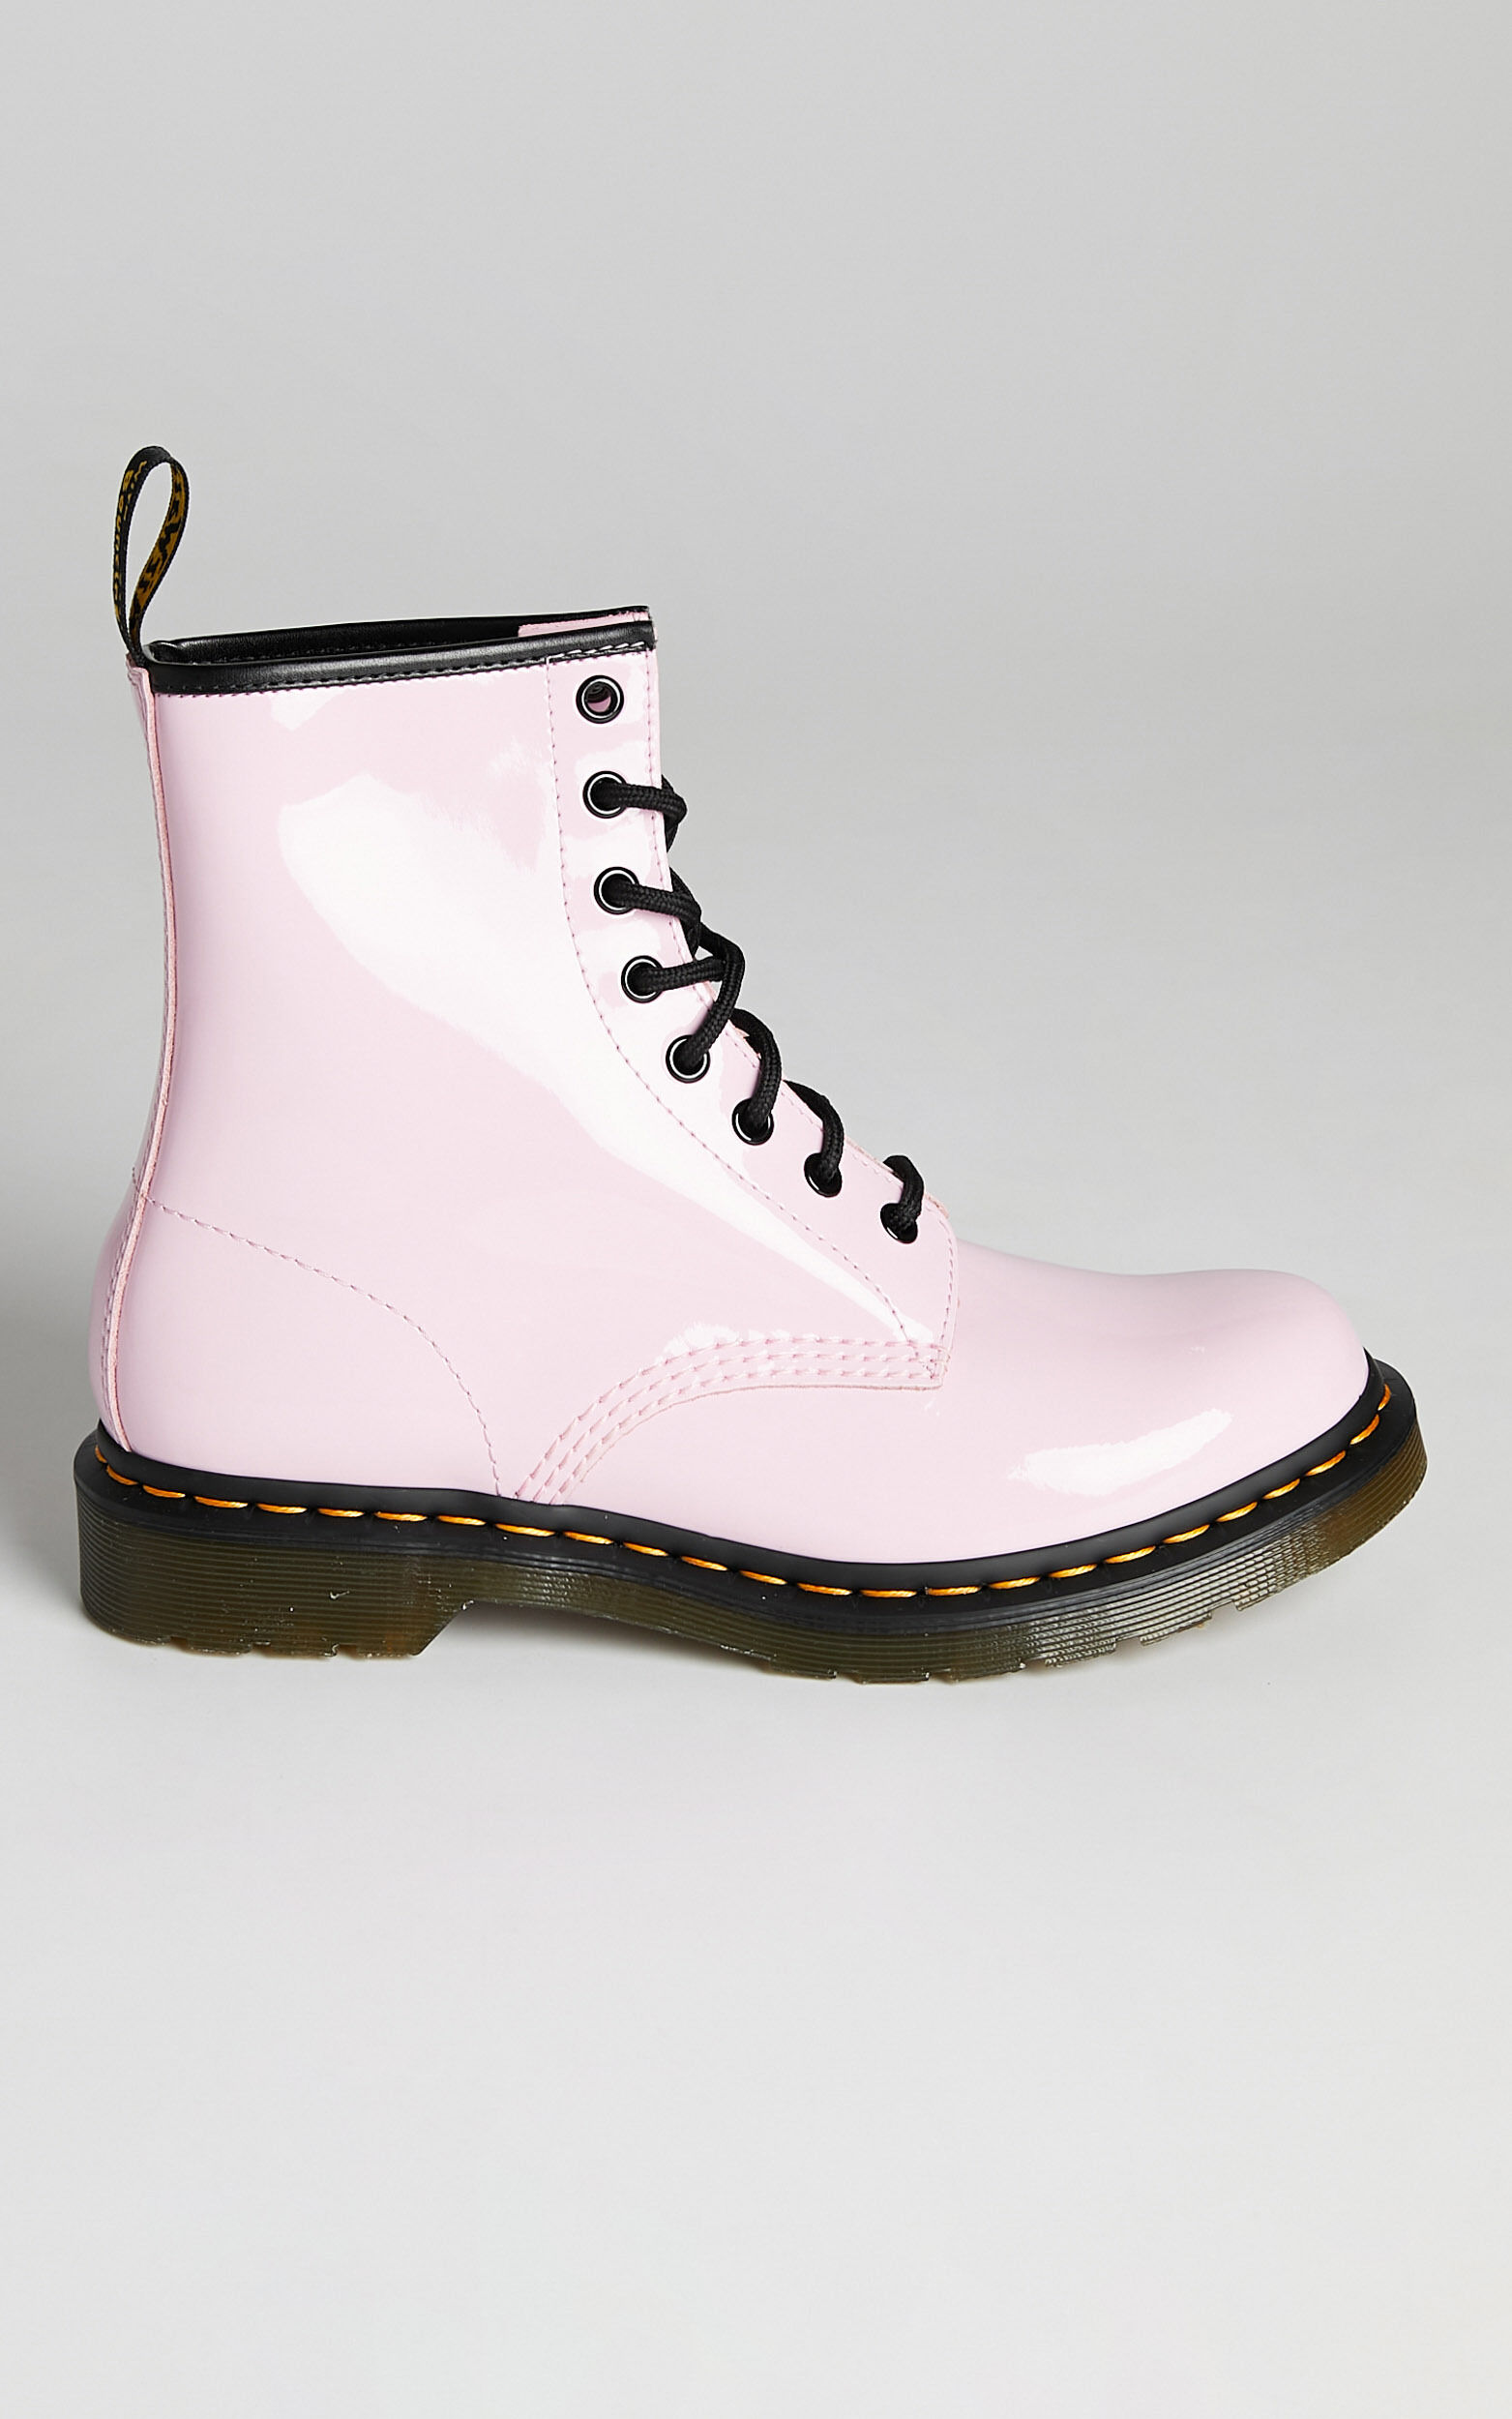 Dr. Martens - 1460 W 8 Eye Boots in Pale Pink Patent Lamper